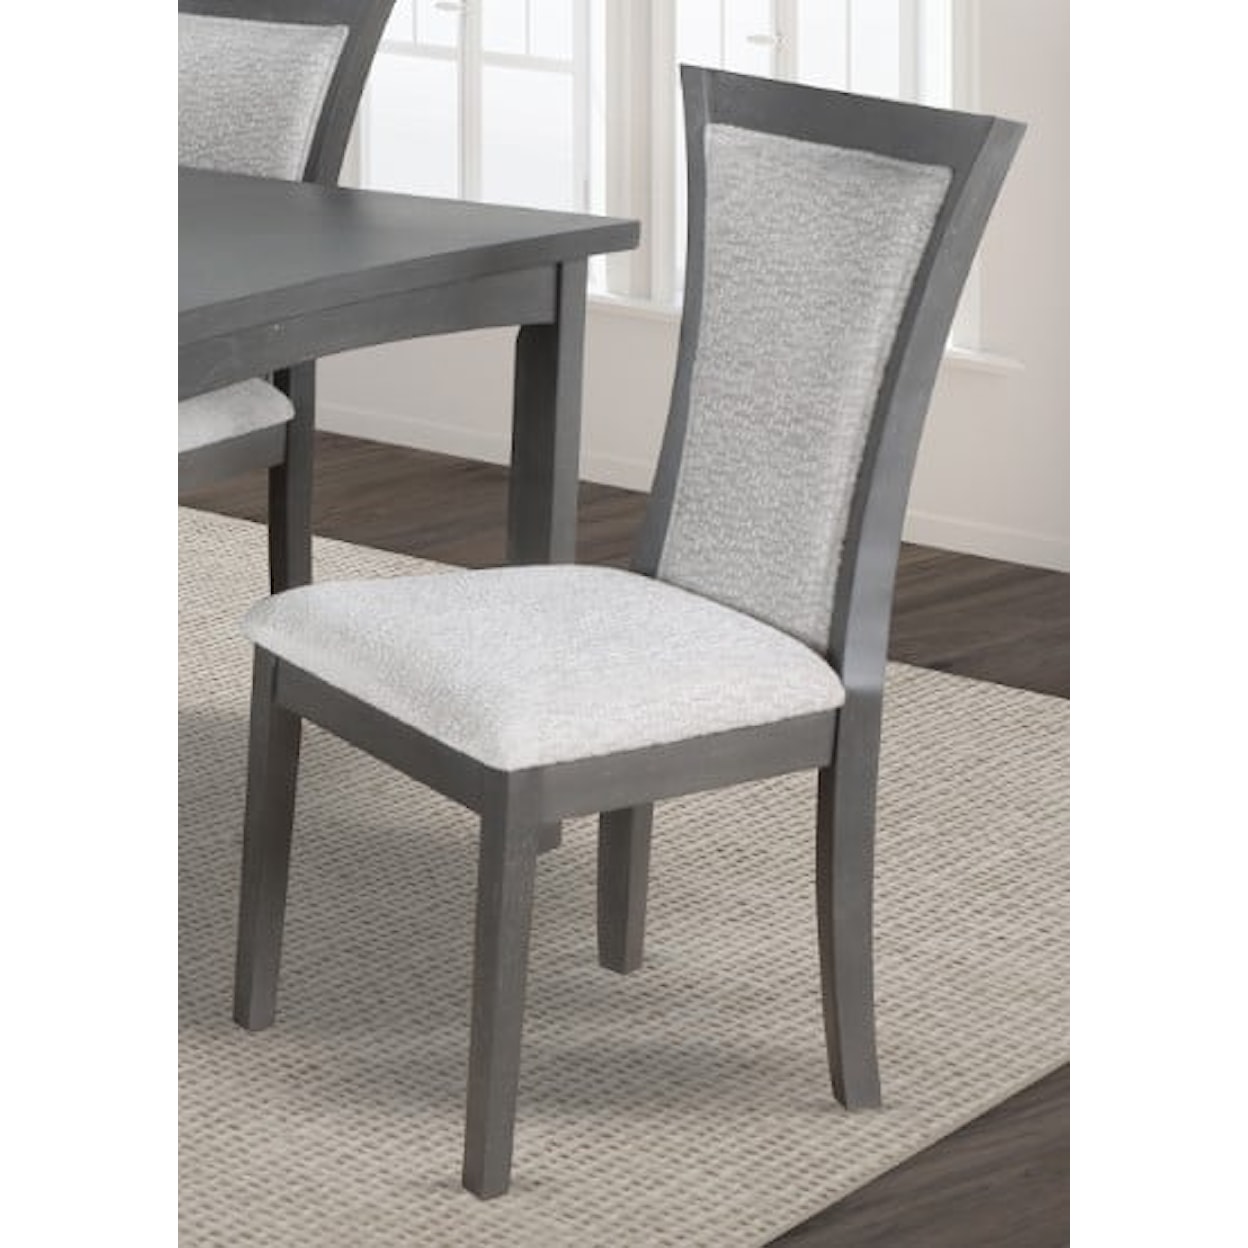 New Classic Furniture Flair Upholstered Dining Chair